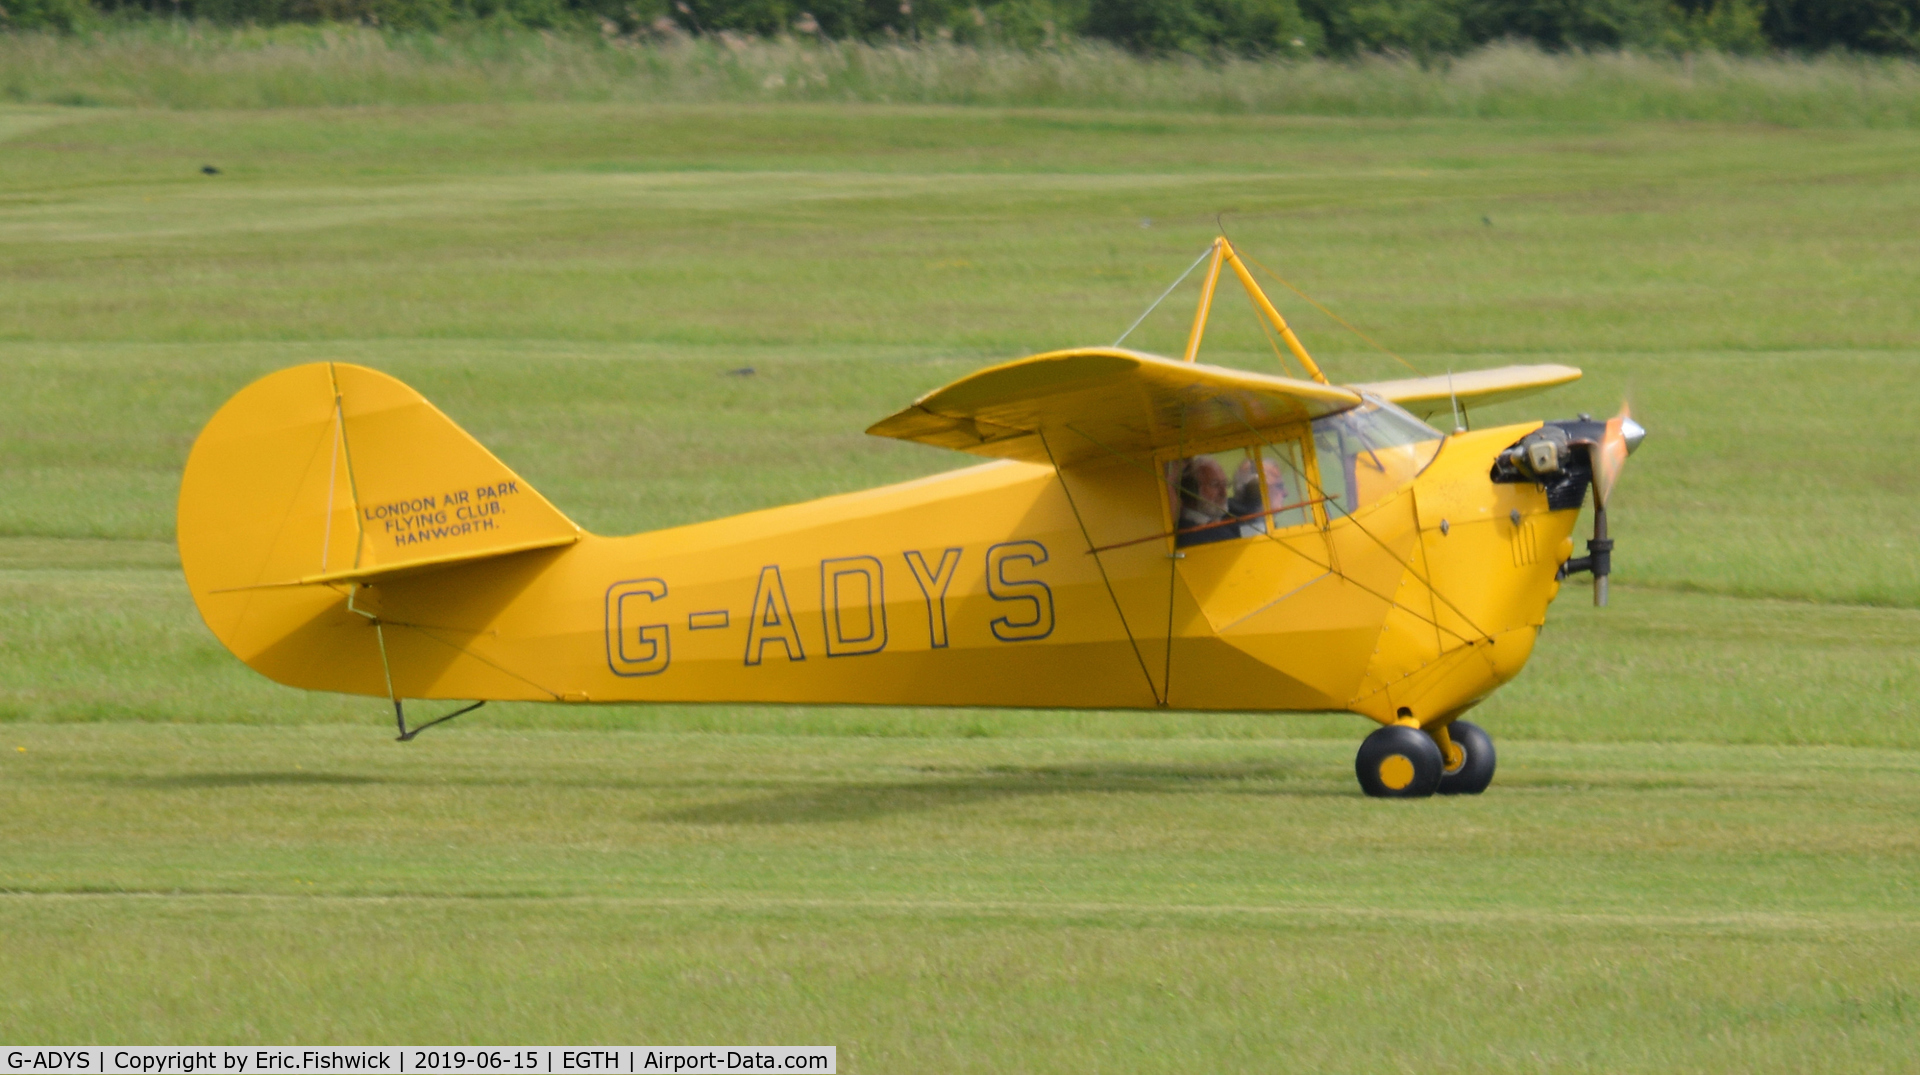 G-ADYS, 1935 Aeronca C-3 C/N A-600, 2. G-ADYS at The Evening Airshow at The Shuttleworth Collection, June, 2019.